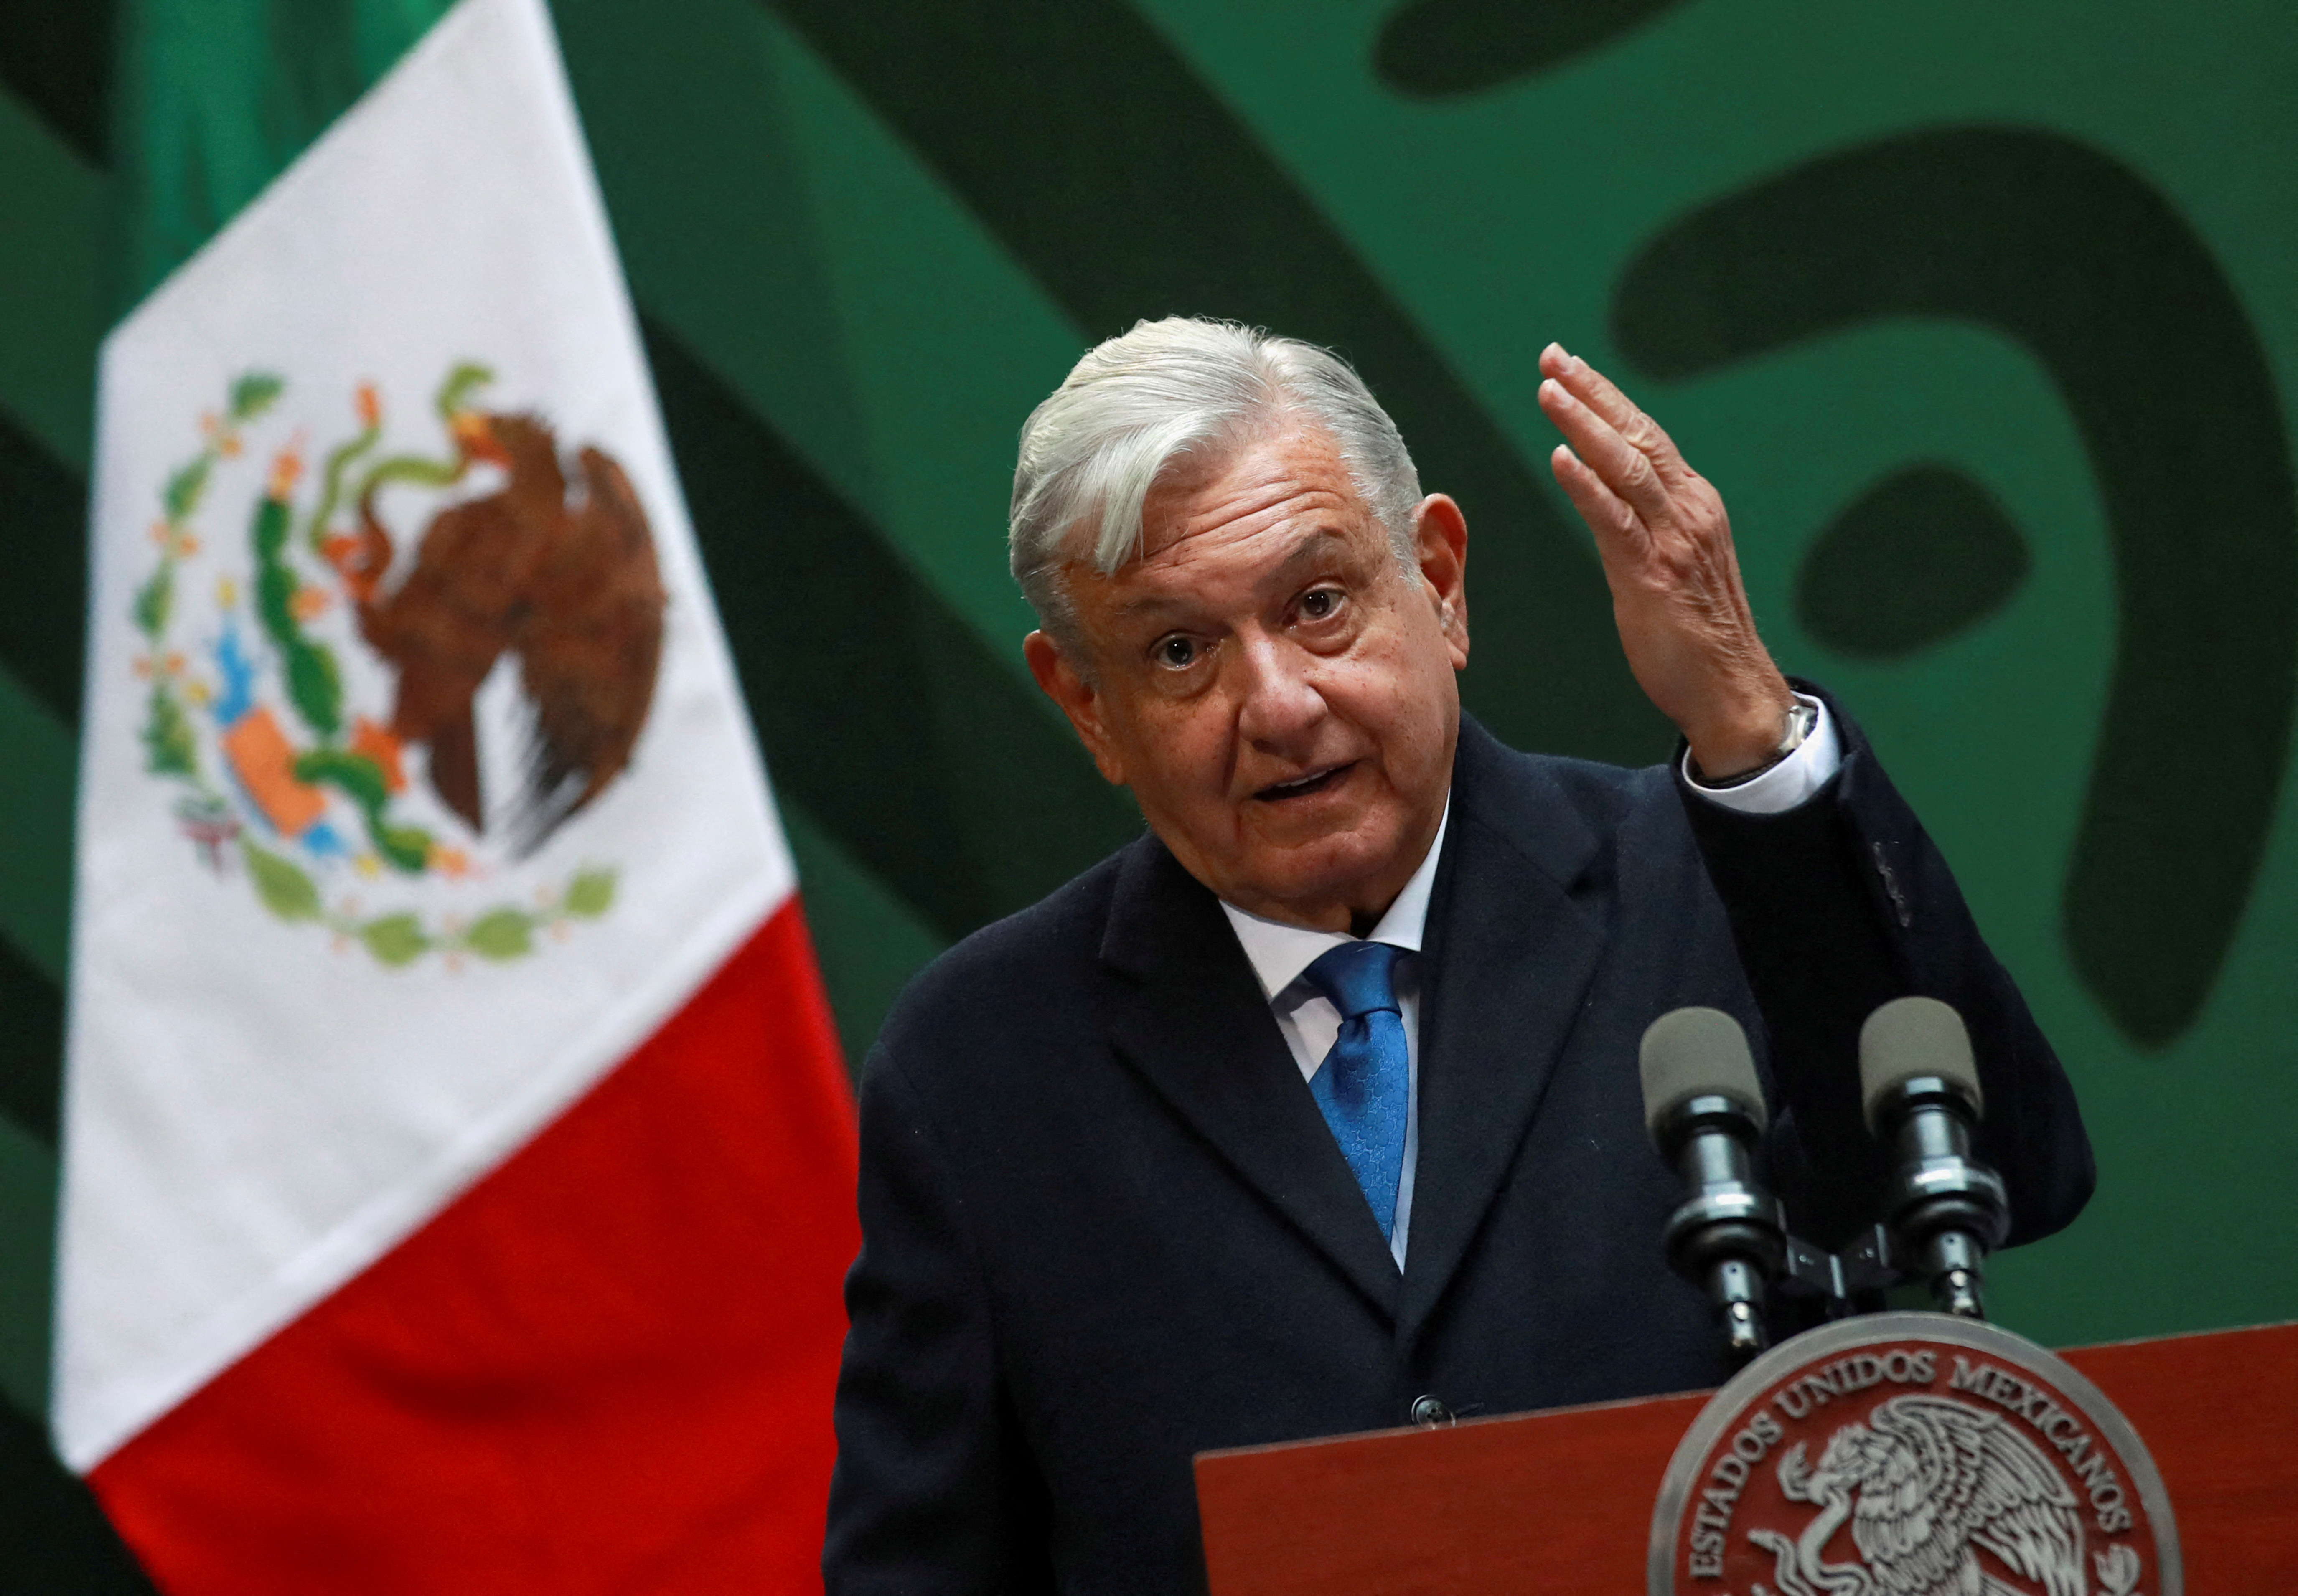 FILE PHOTO: Mexico's President Andres Manuel Lopez Obrador speaks during a news conference at the Old City Hall (Antiguo Palacio del Ayuntamiento), in Mexico City, Mexico January 20, 2023. REUTERS/Henry Romero/File Photo